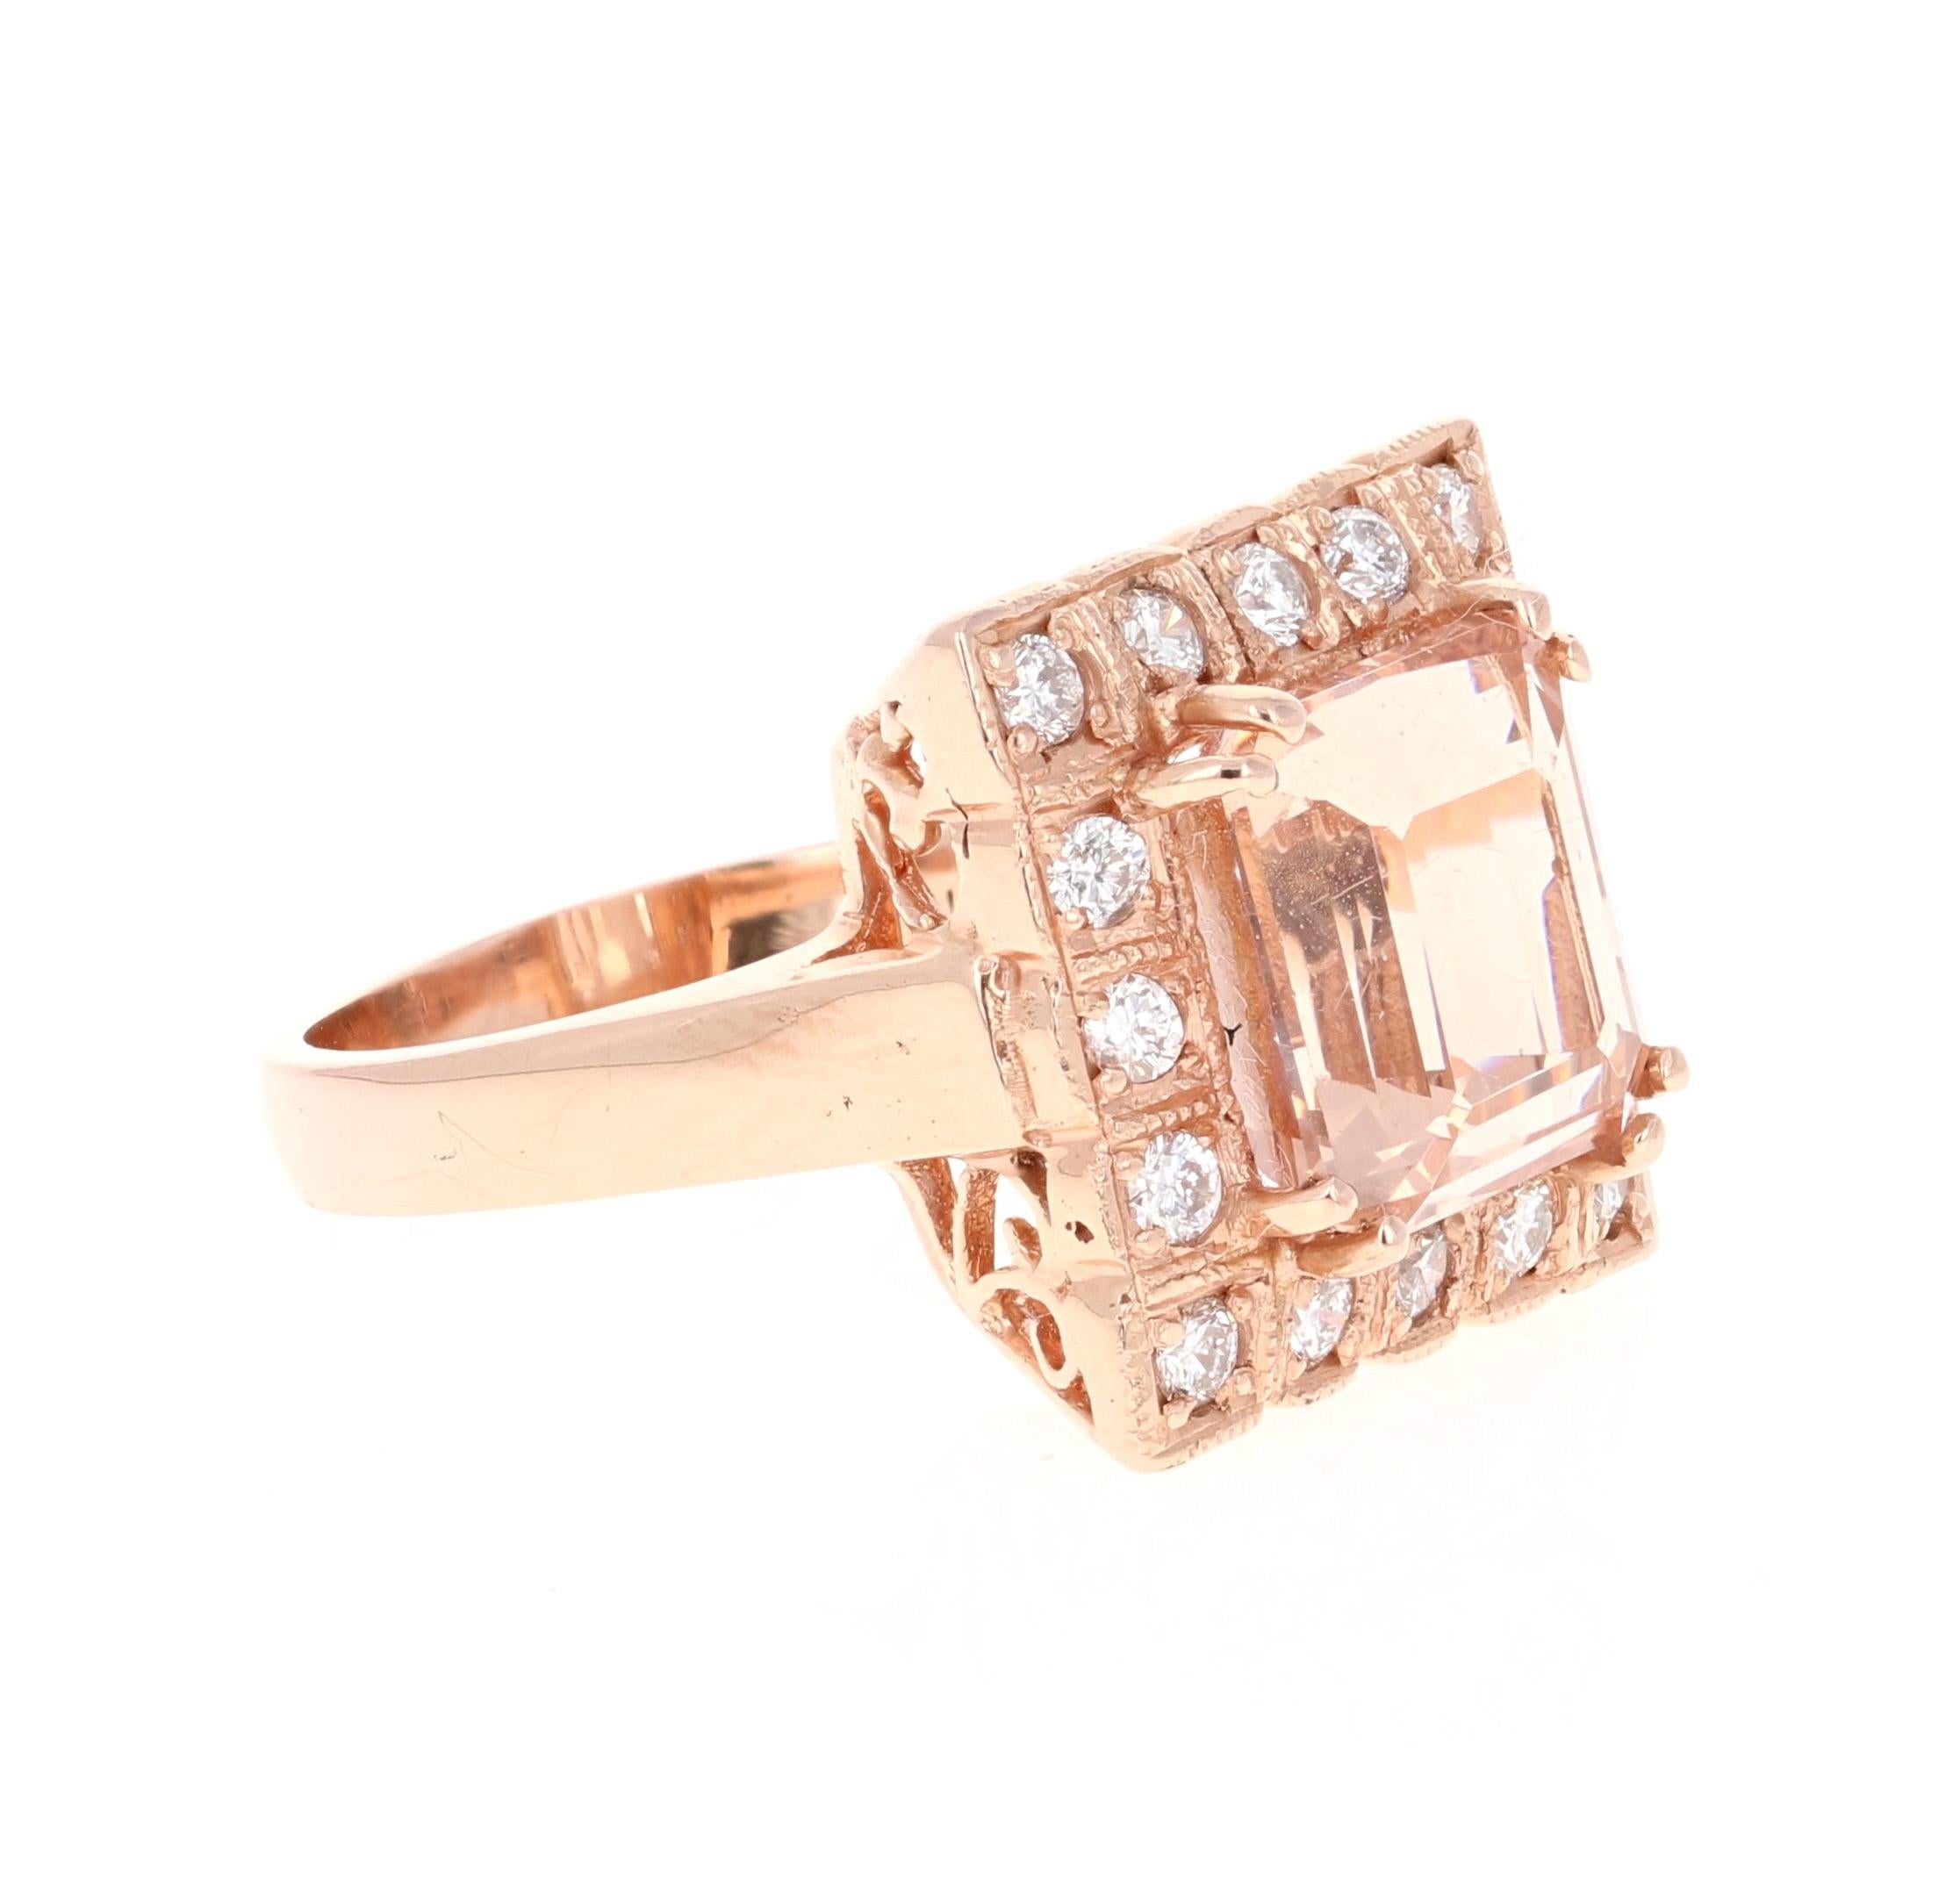 This Morganite ring has a 6.06 Carat Square-Emerald Cut Morganite and is surrounded by 16 Round Cut Diamonds that weigh 0.59 Carats. The total carat weight of the ring is 6.65 Carats.  

It is set in 14 Karat Rose Gold and weighs approximately 8.3